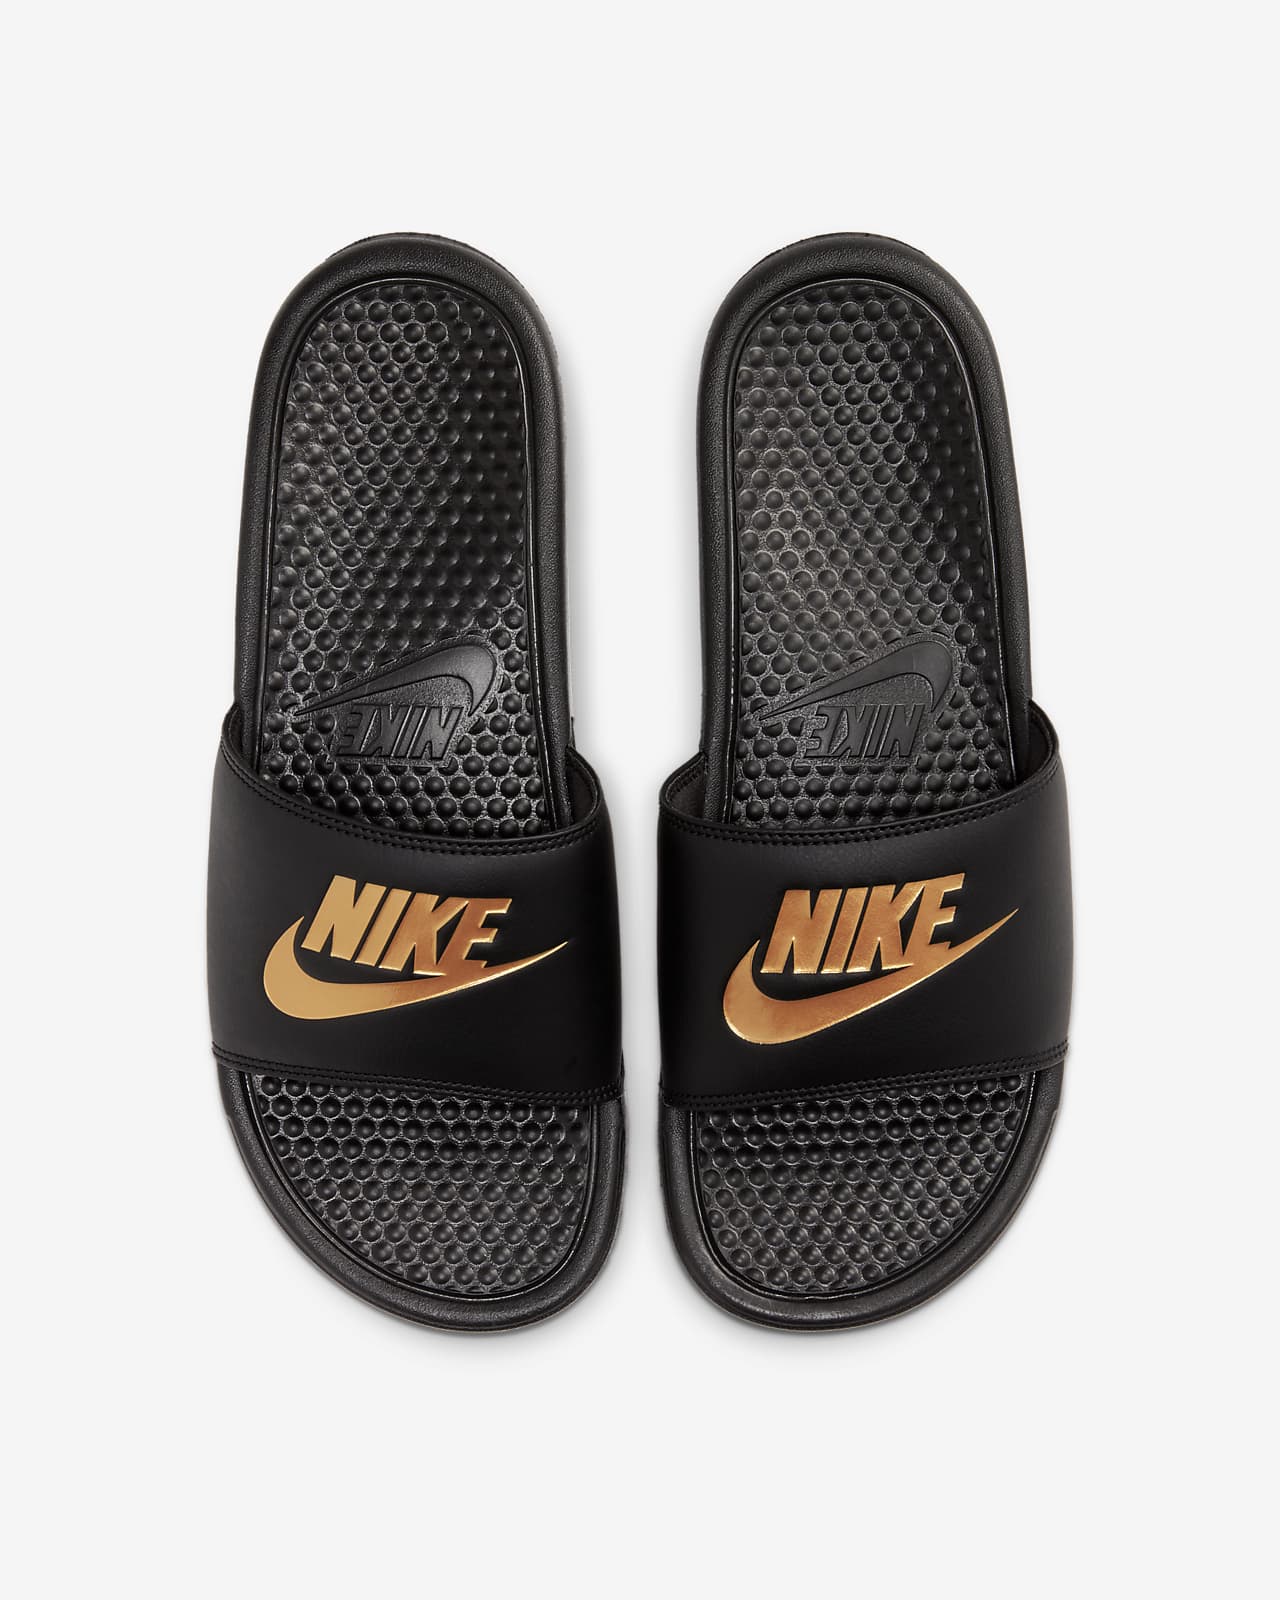 nike slippers with gold check